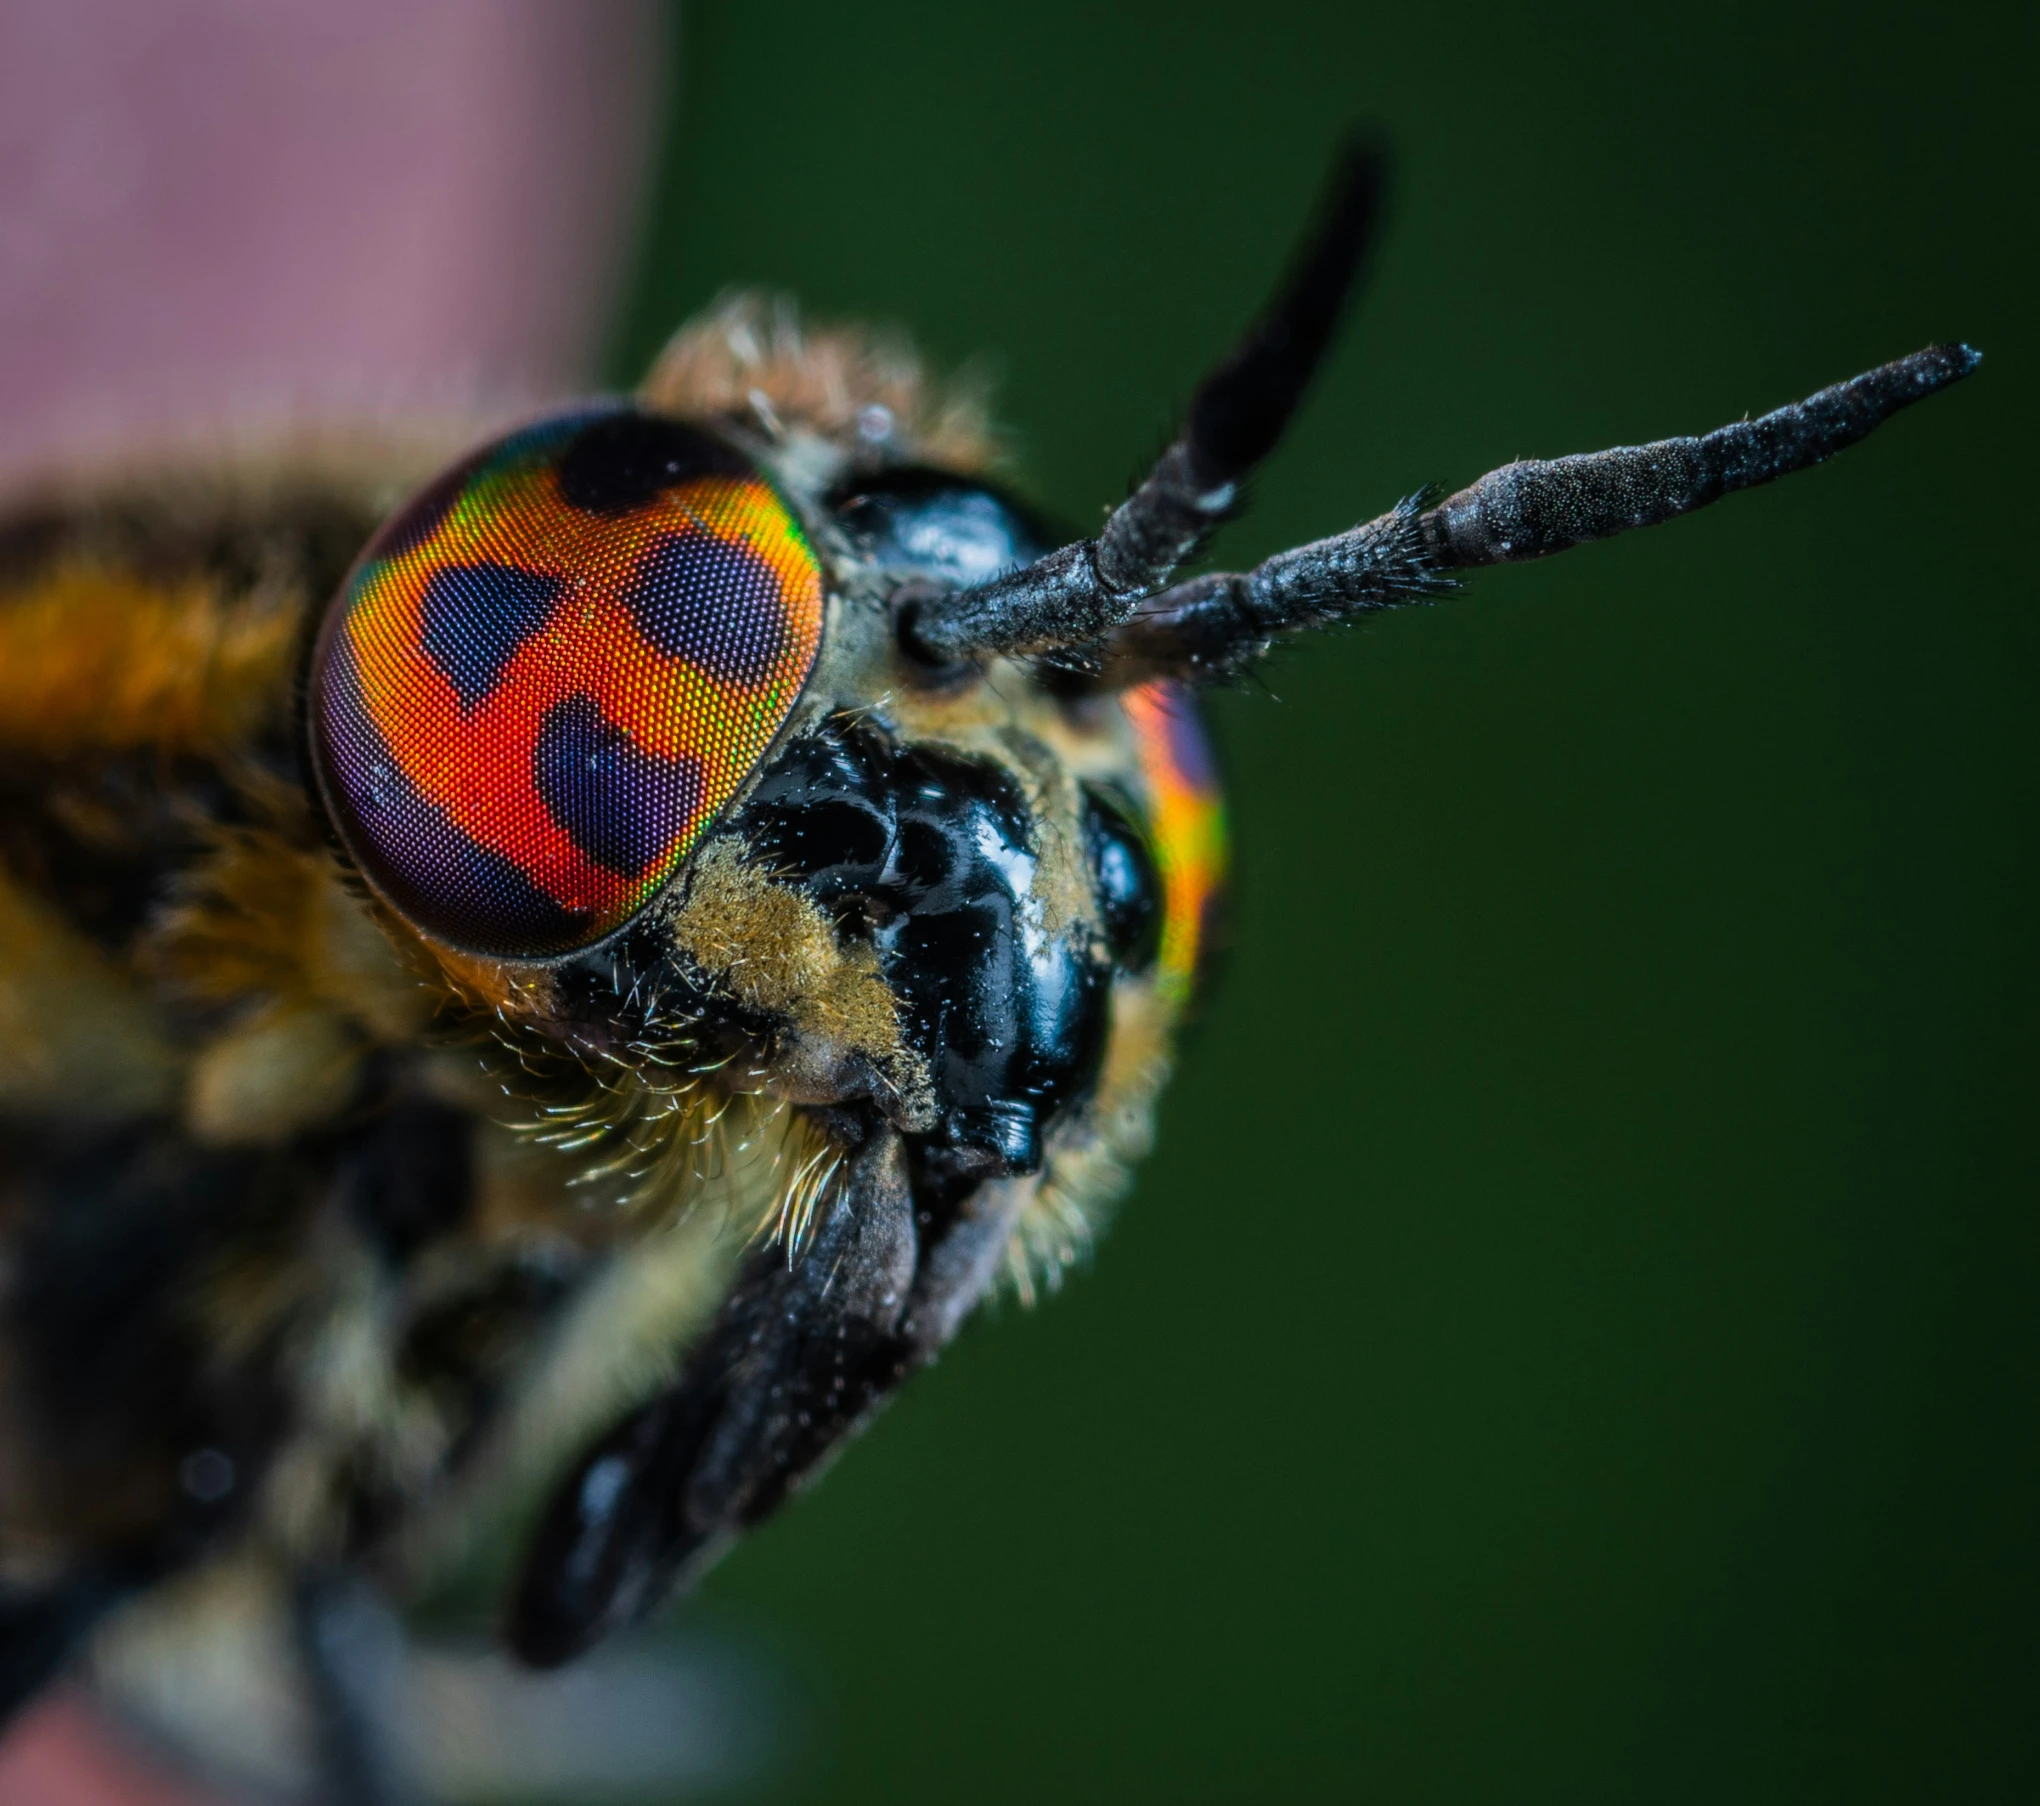 the close up view of a bee on the end of a finger